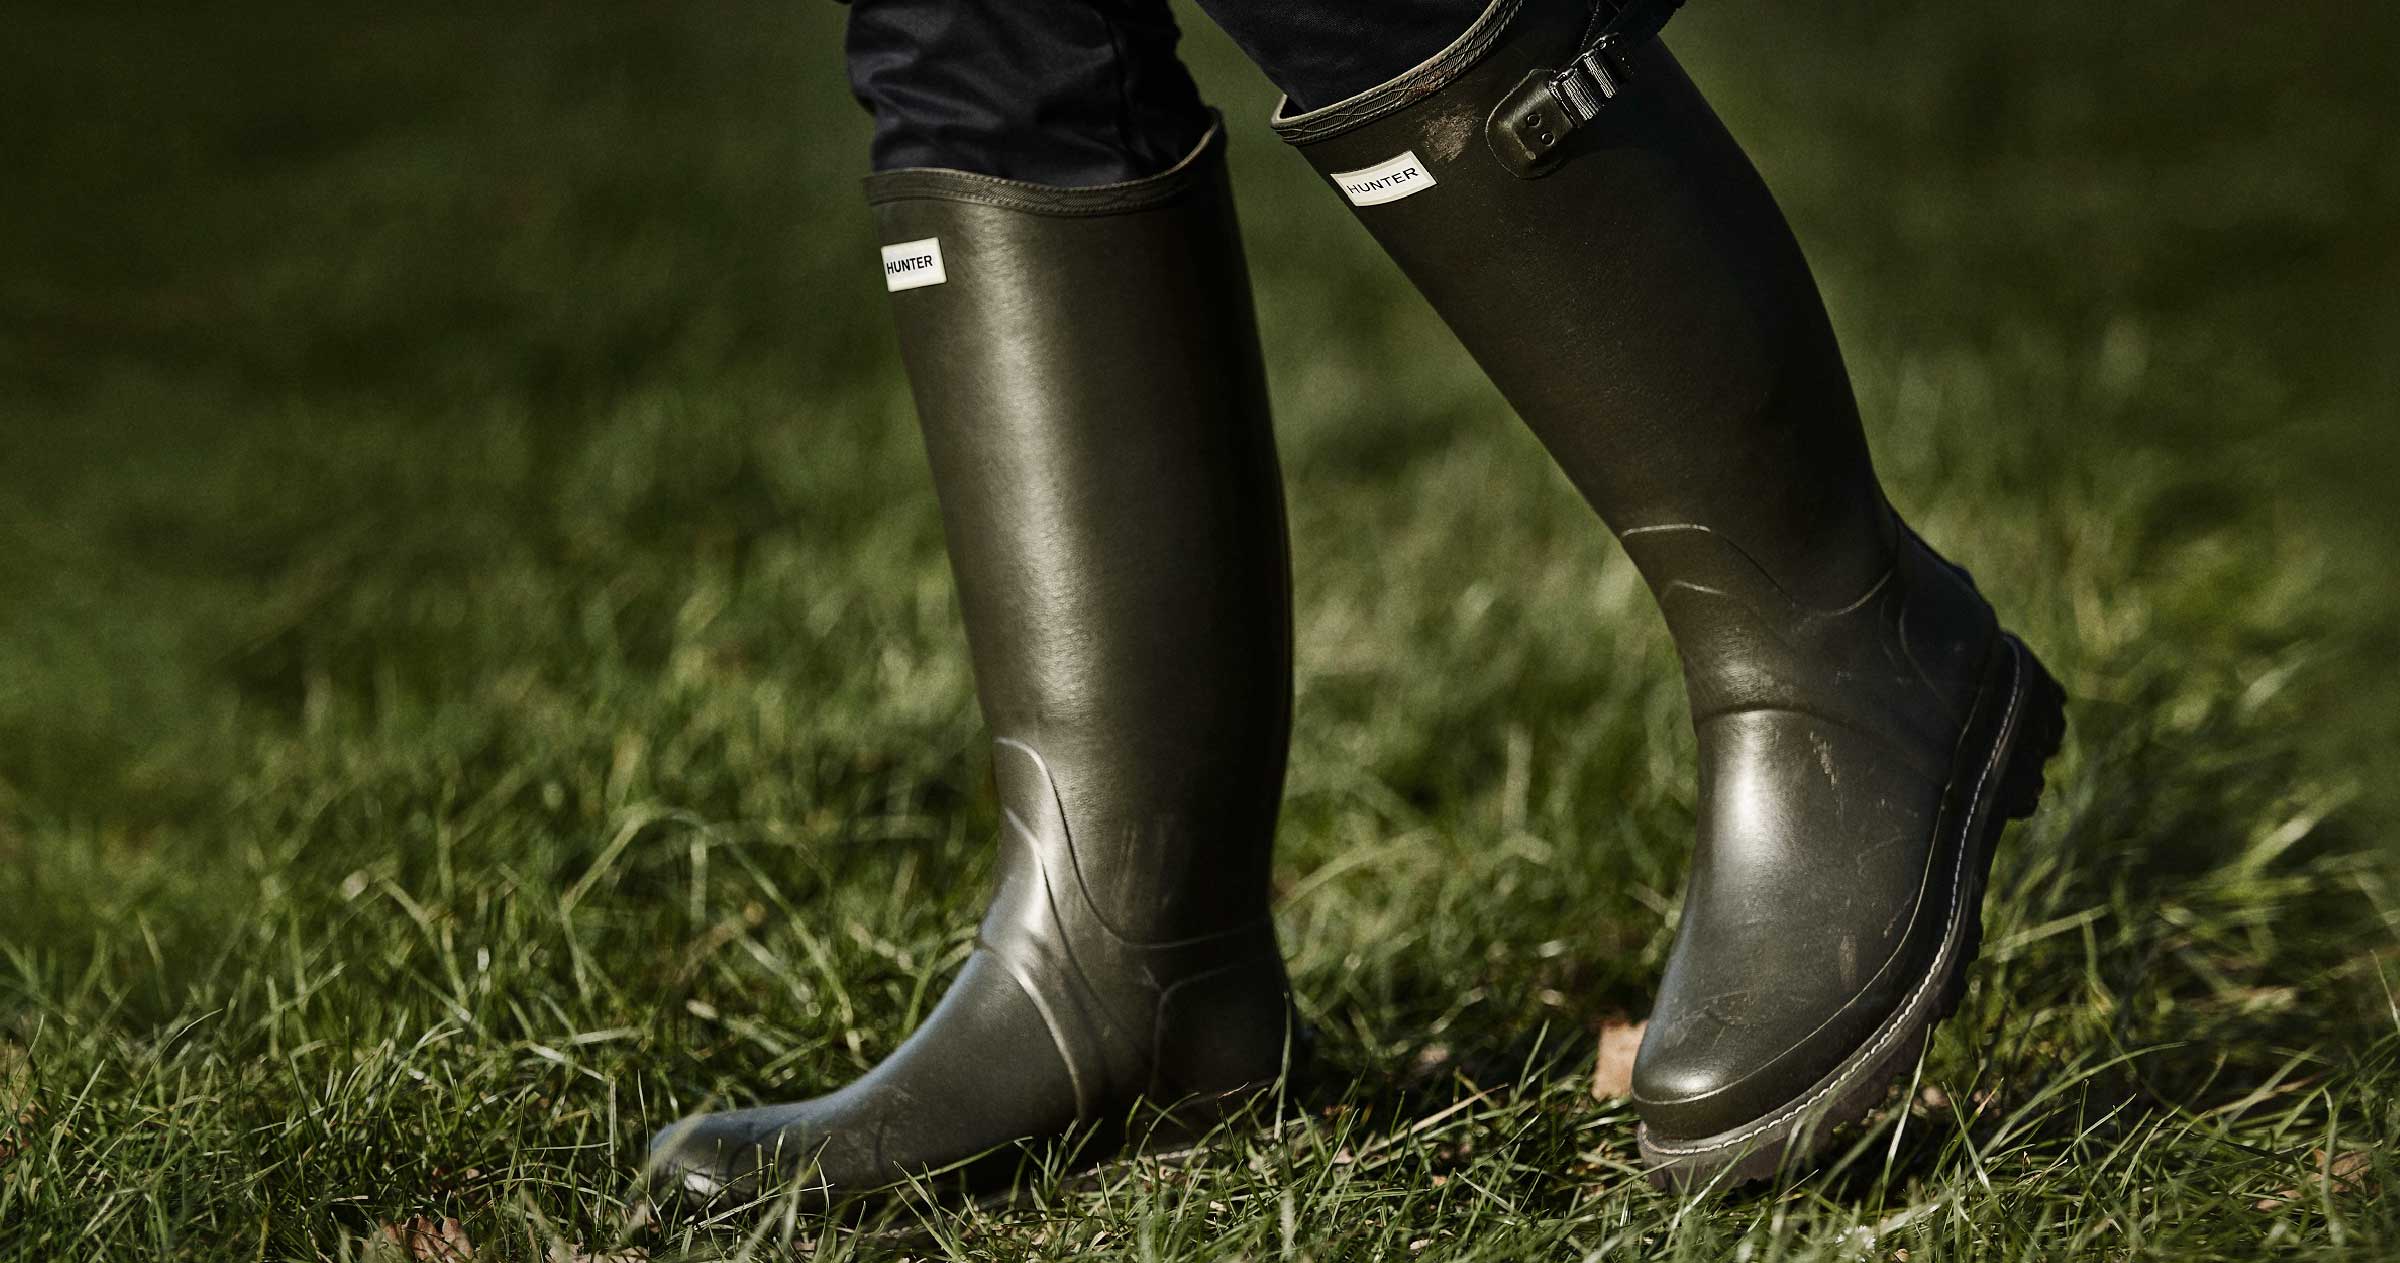 Autumn Wellie Sale - Limited Time Only!